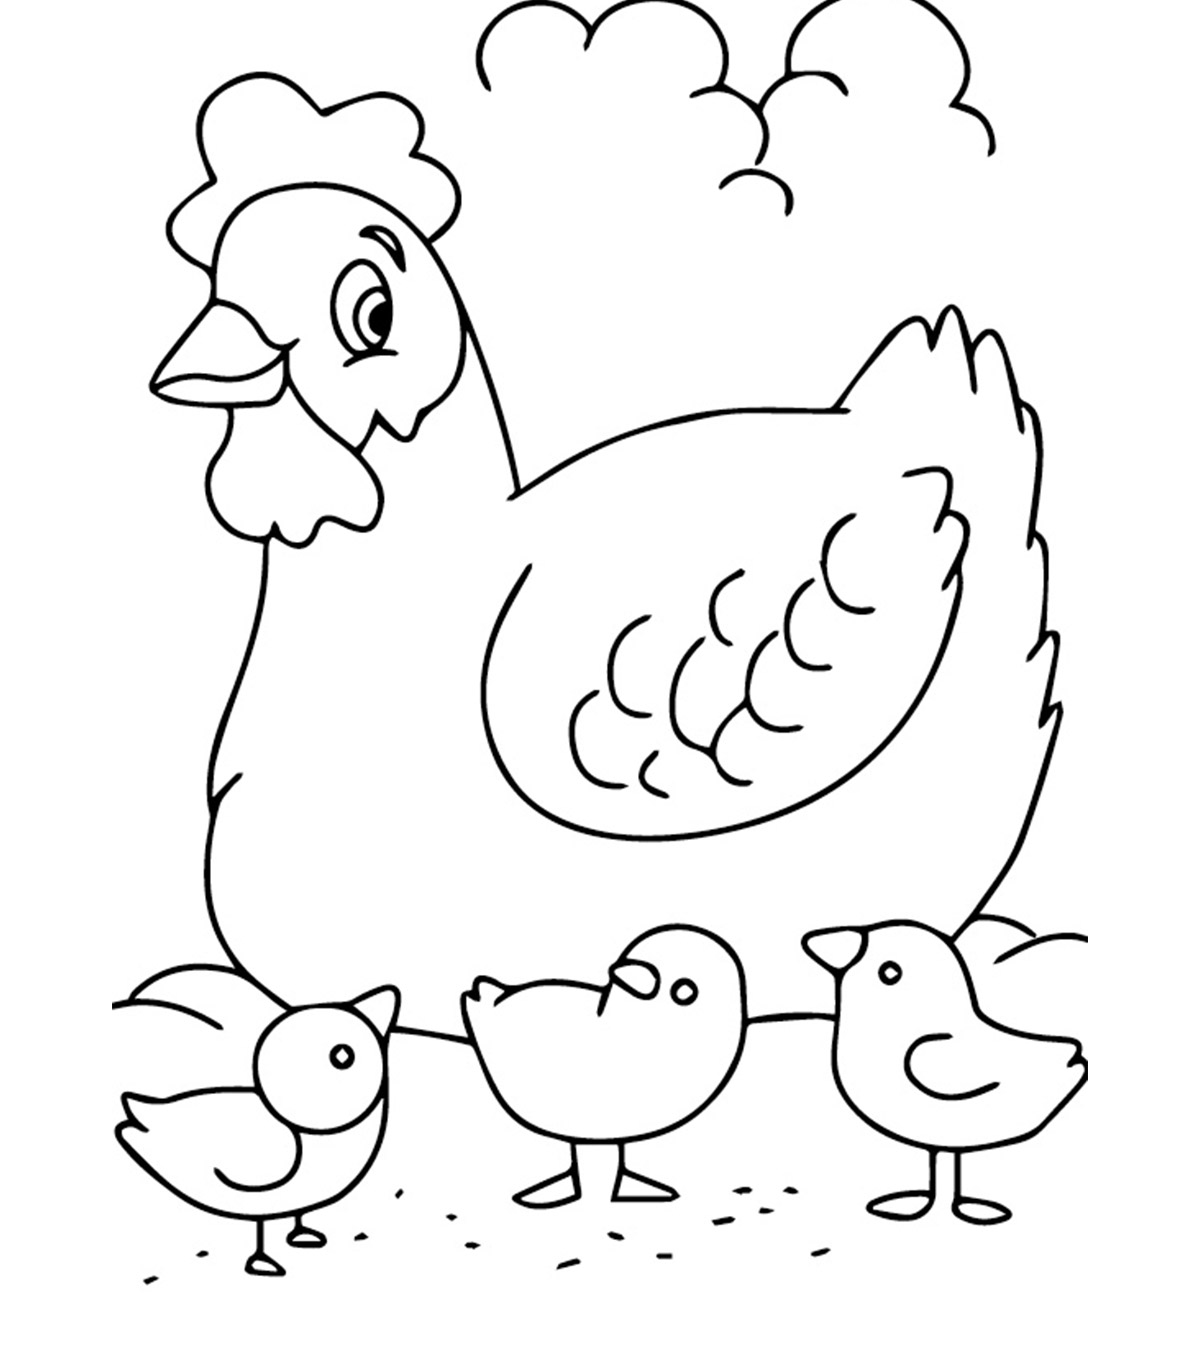 10 Cute Farm Animals Coloring Pages Your Toddler Will Love